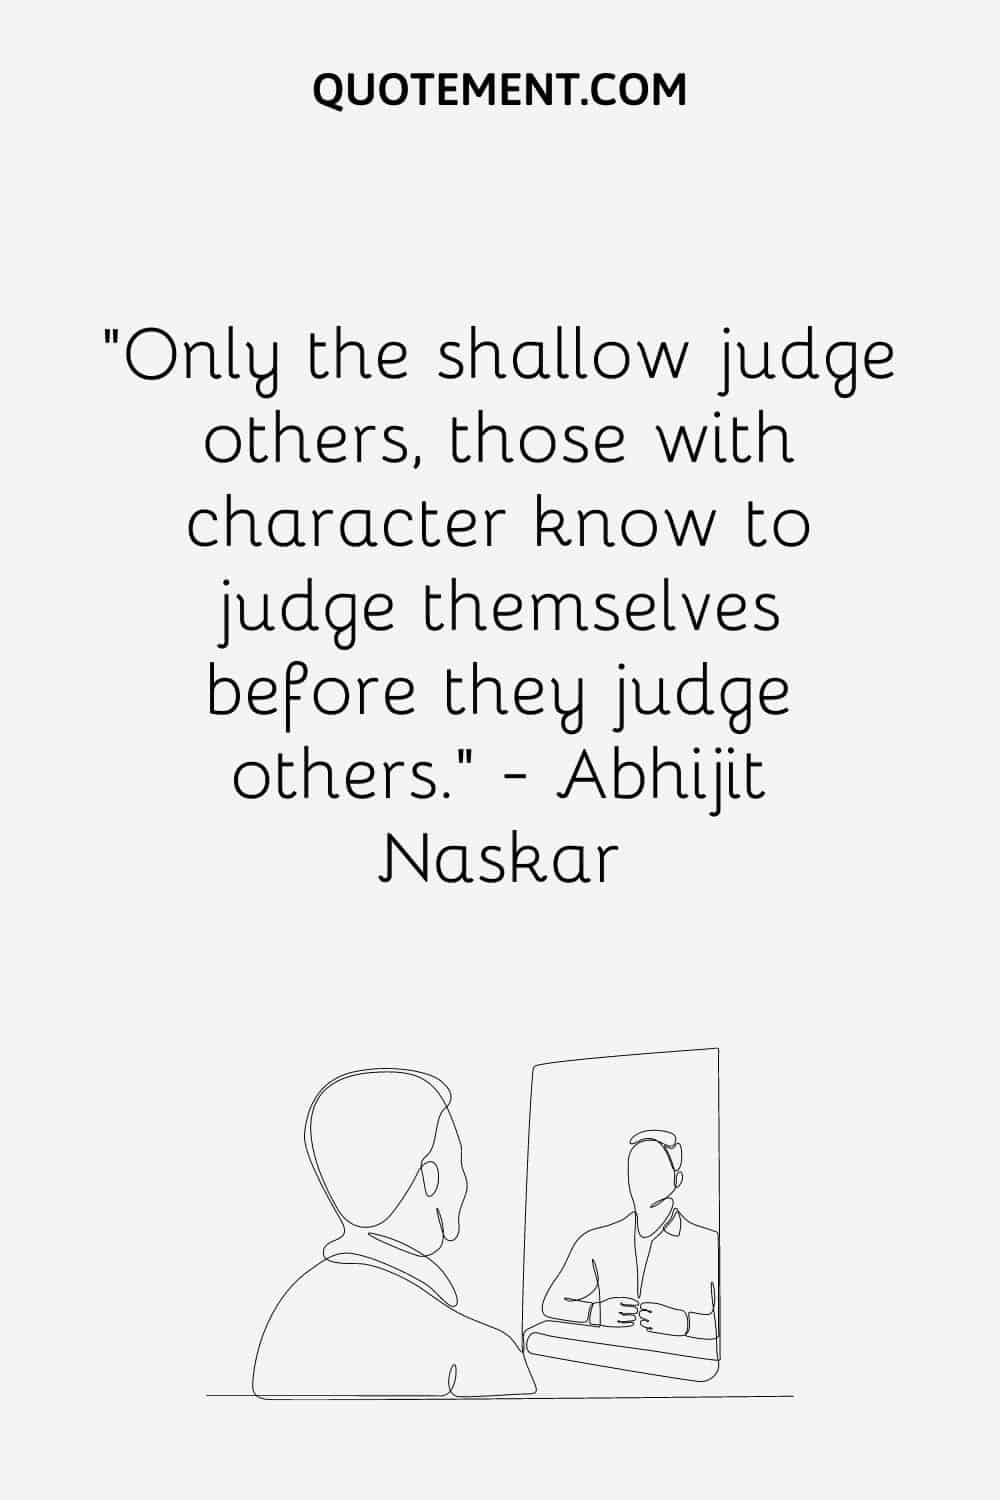 “Only the shallow judge others, those with character know to judge themselves before they judge others.” — Abhijit Naskar